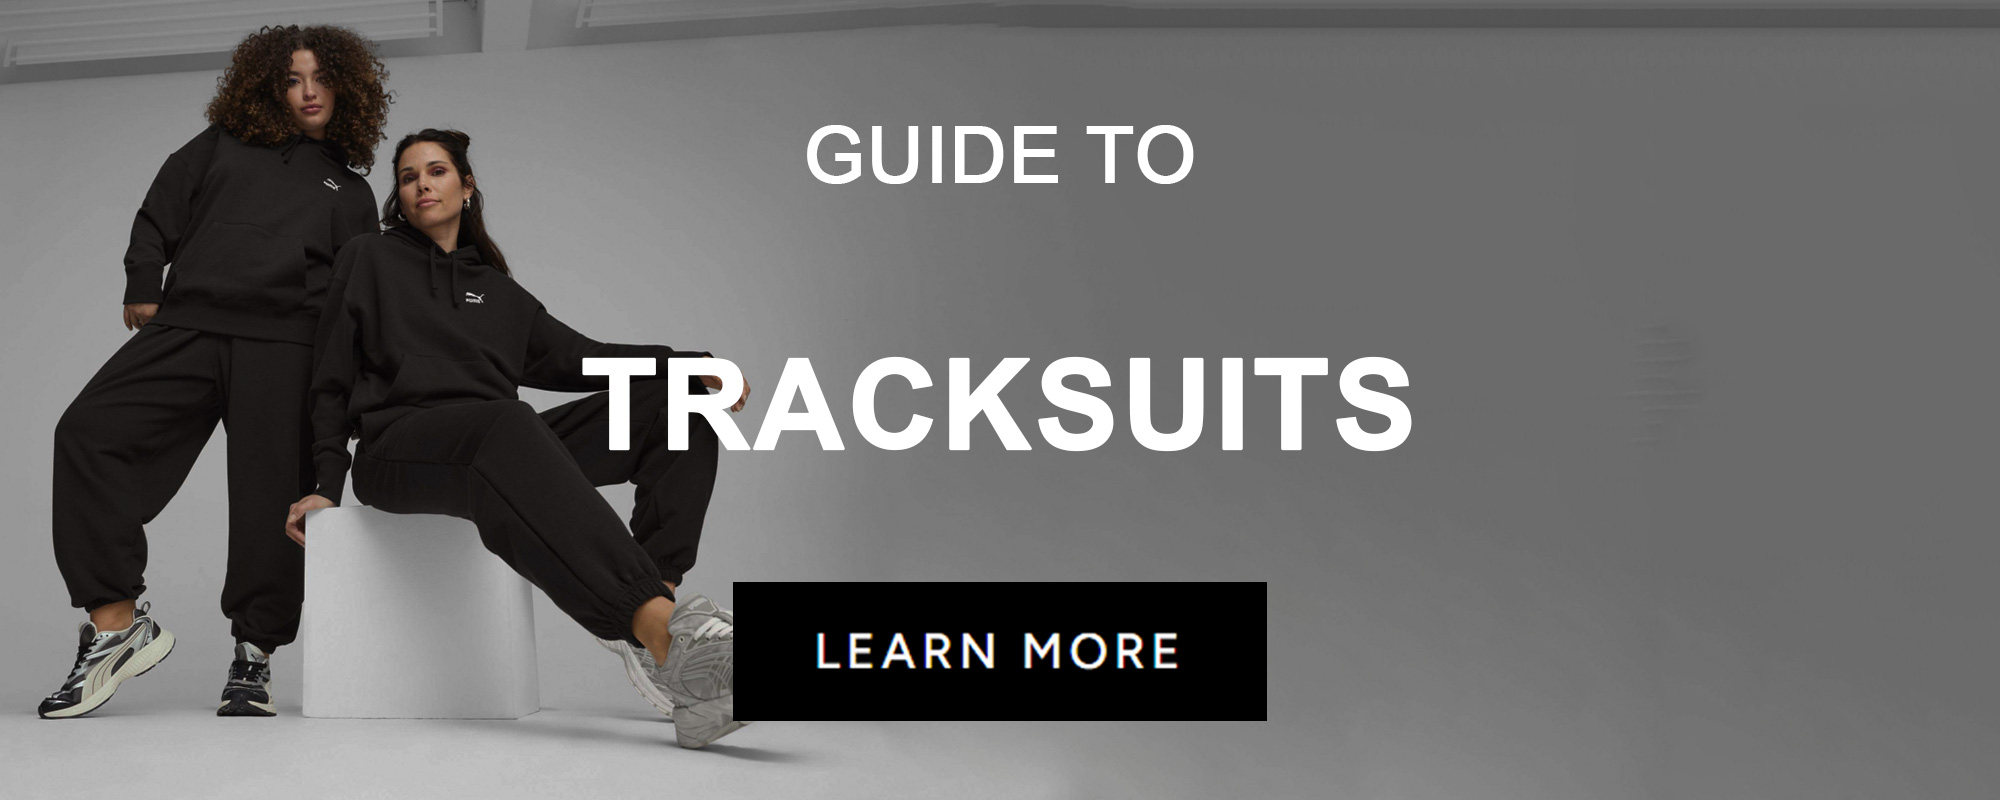 GUIDES_CLOTHES_Tracksuits.jpg